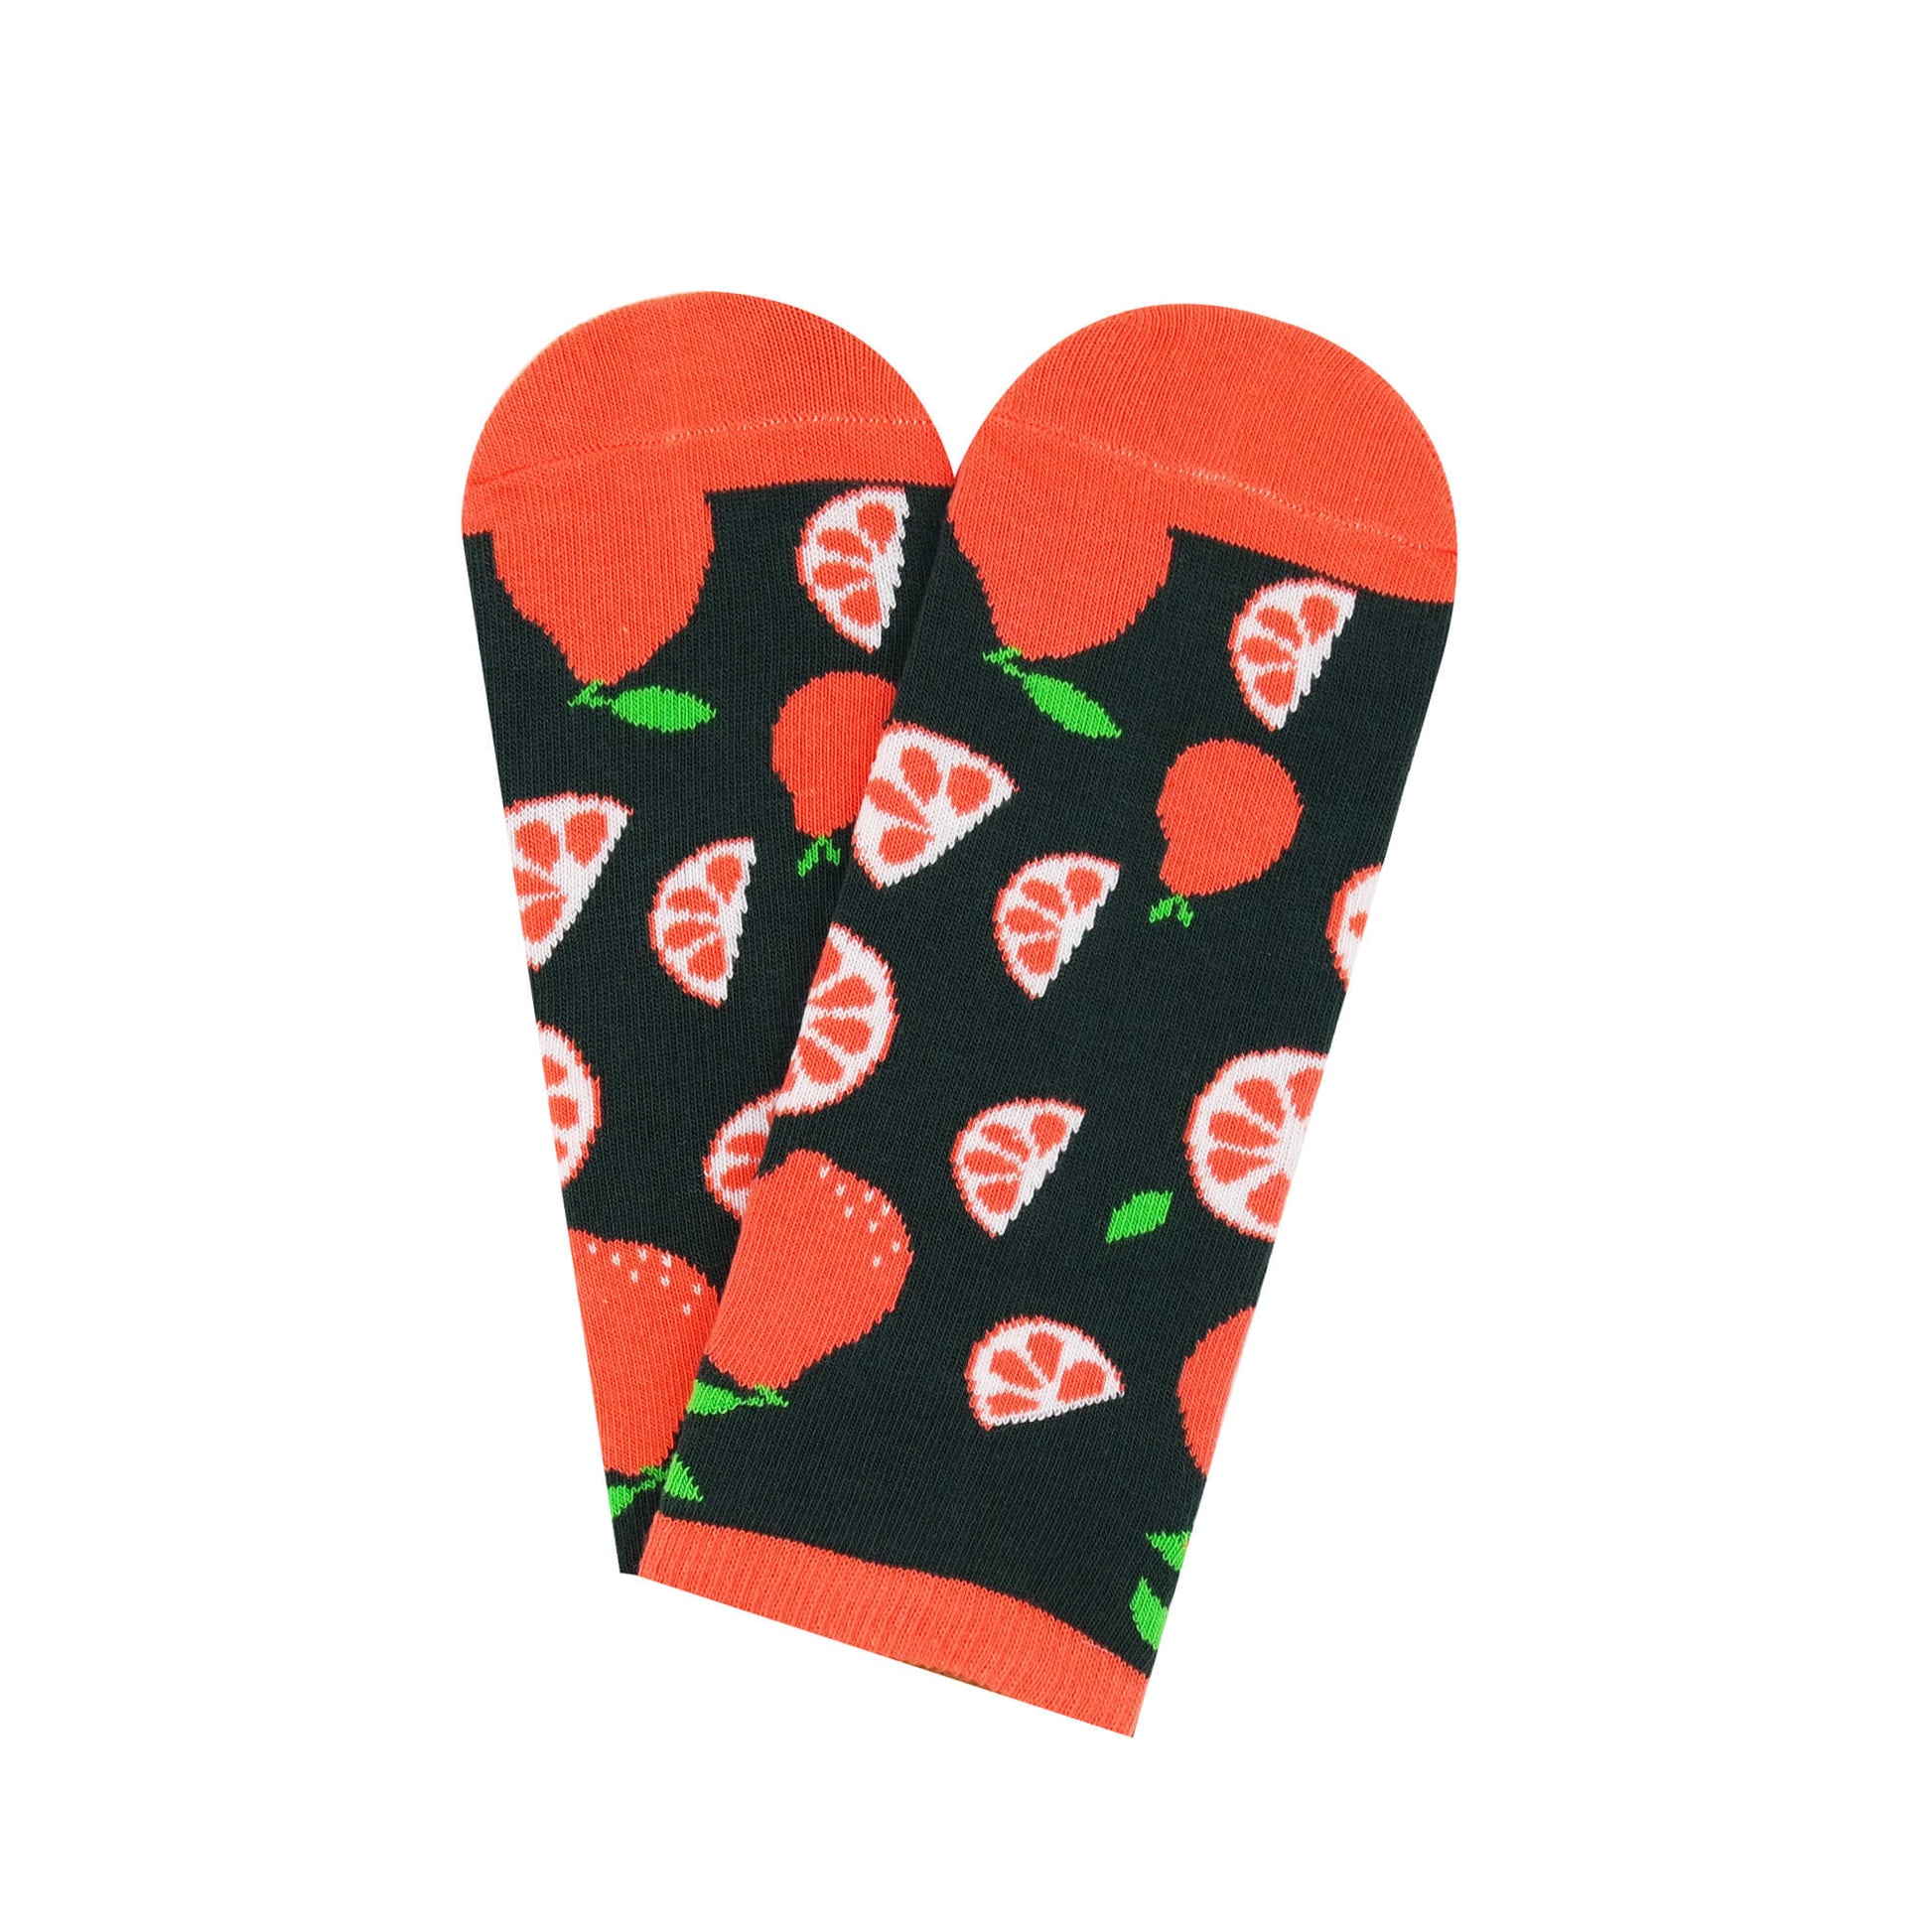 low-cut socks with an orange pattern design, offering a stylish and vibrant addition to any outfit.